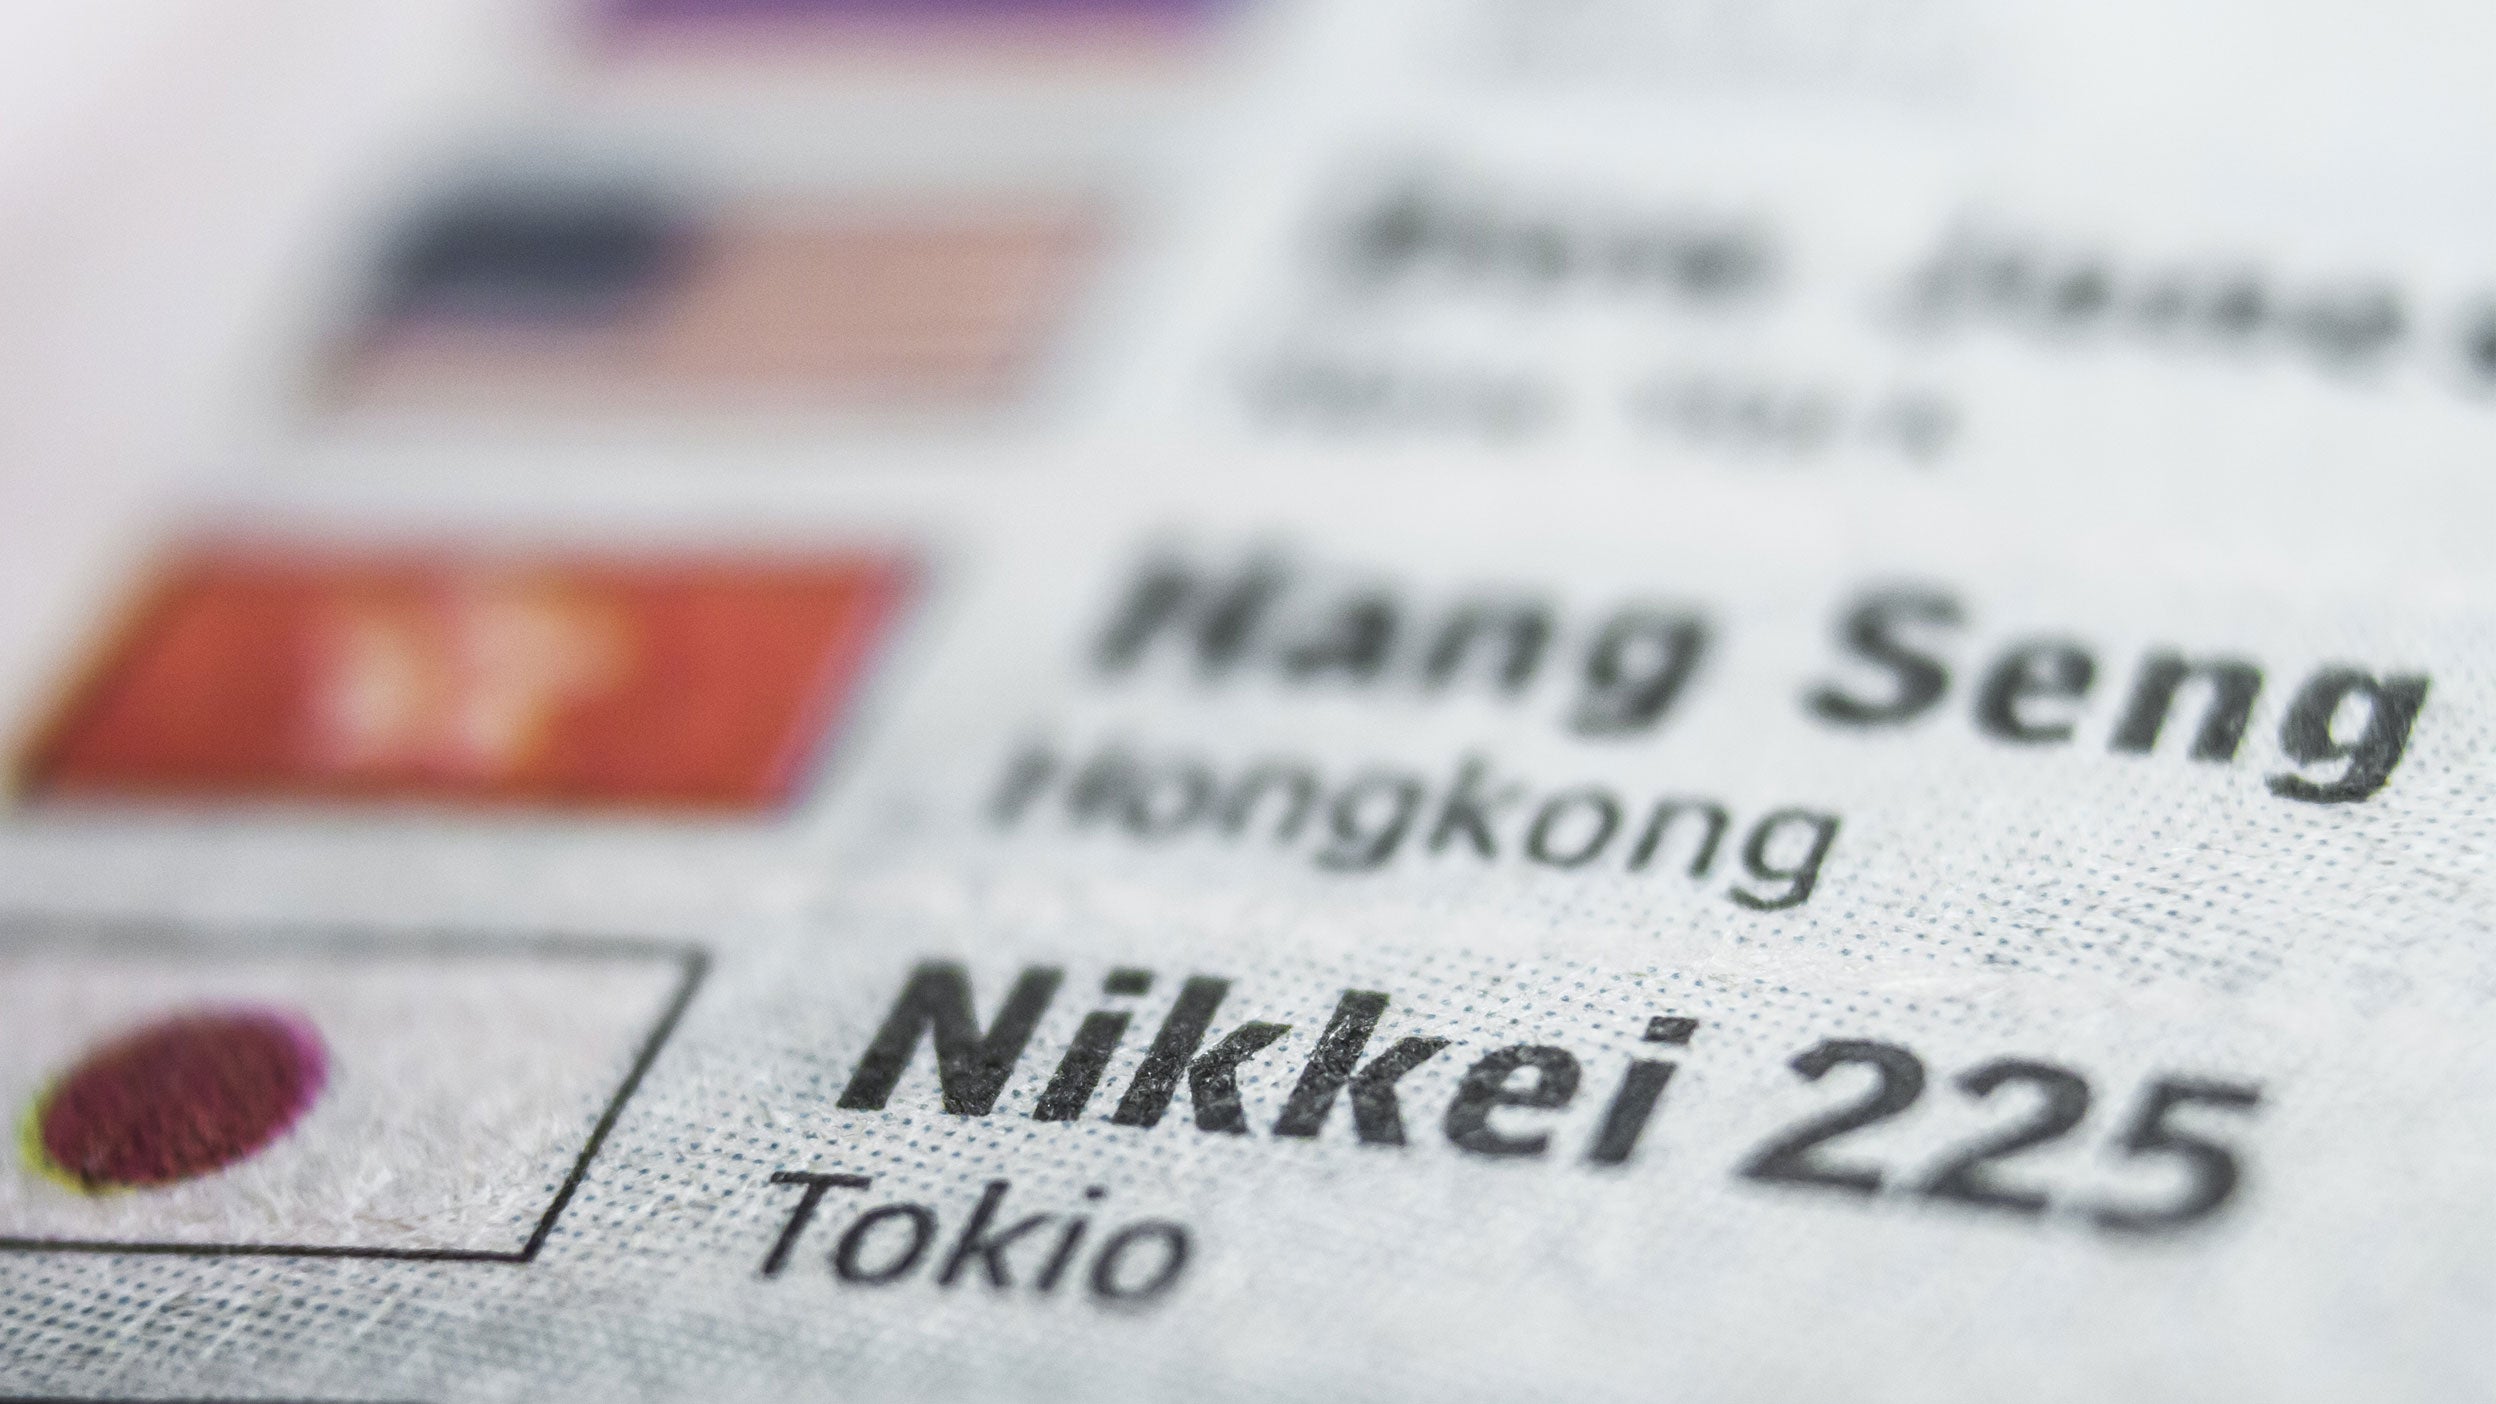 Uncommon truths - Nikkei at 40,000?